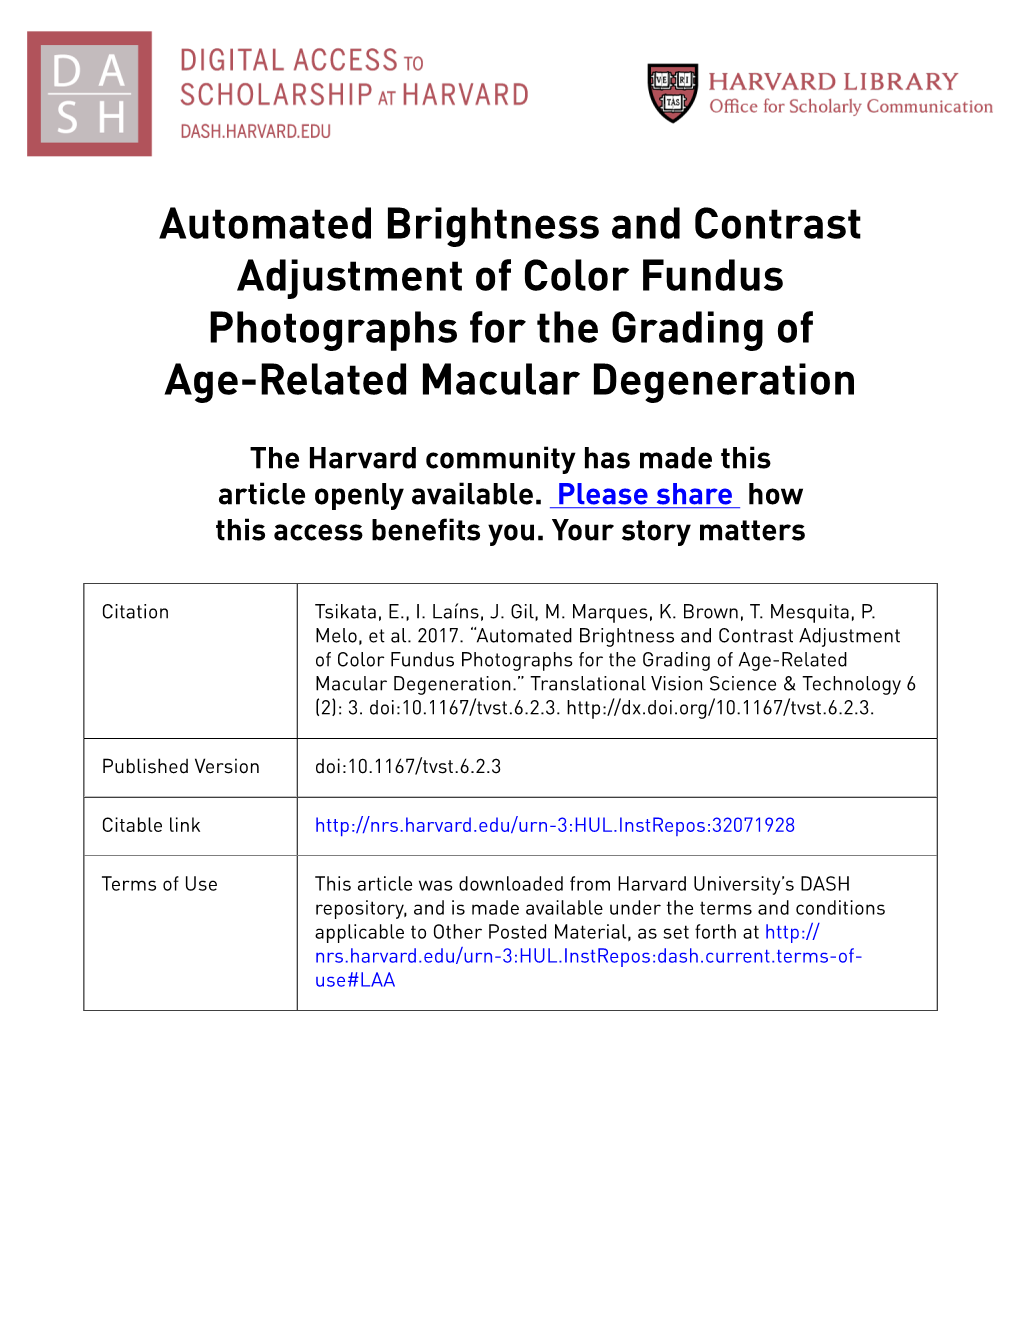 Automated Brightness and Contrast Adjustment of Color Fundus Photographs for the Grading of Age-Related Macular Degeneration